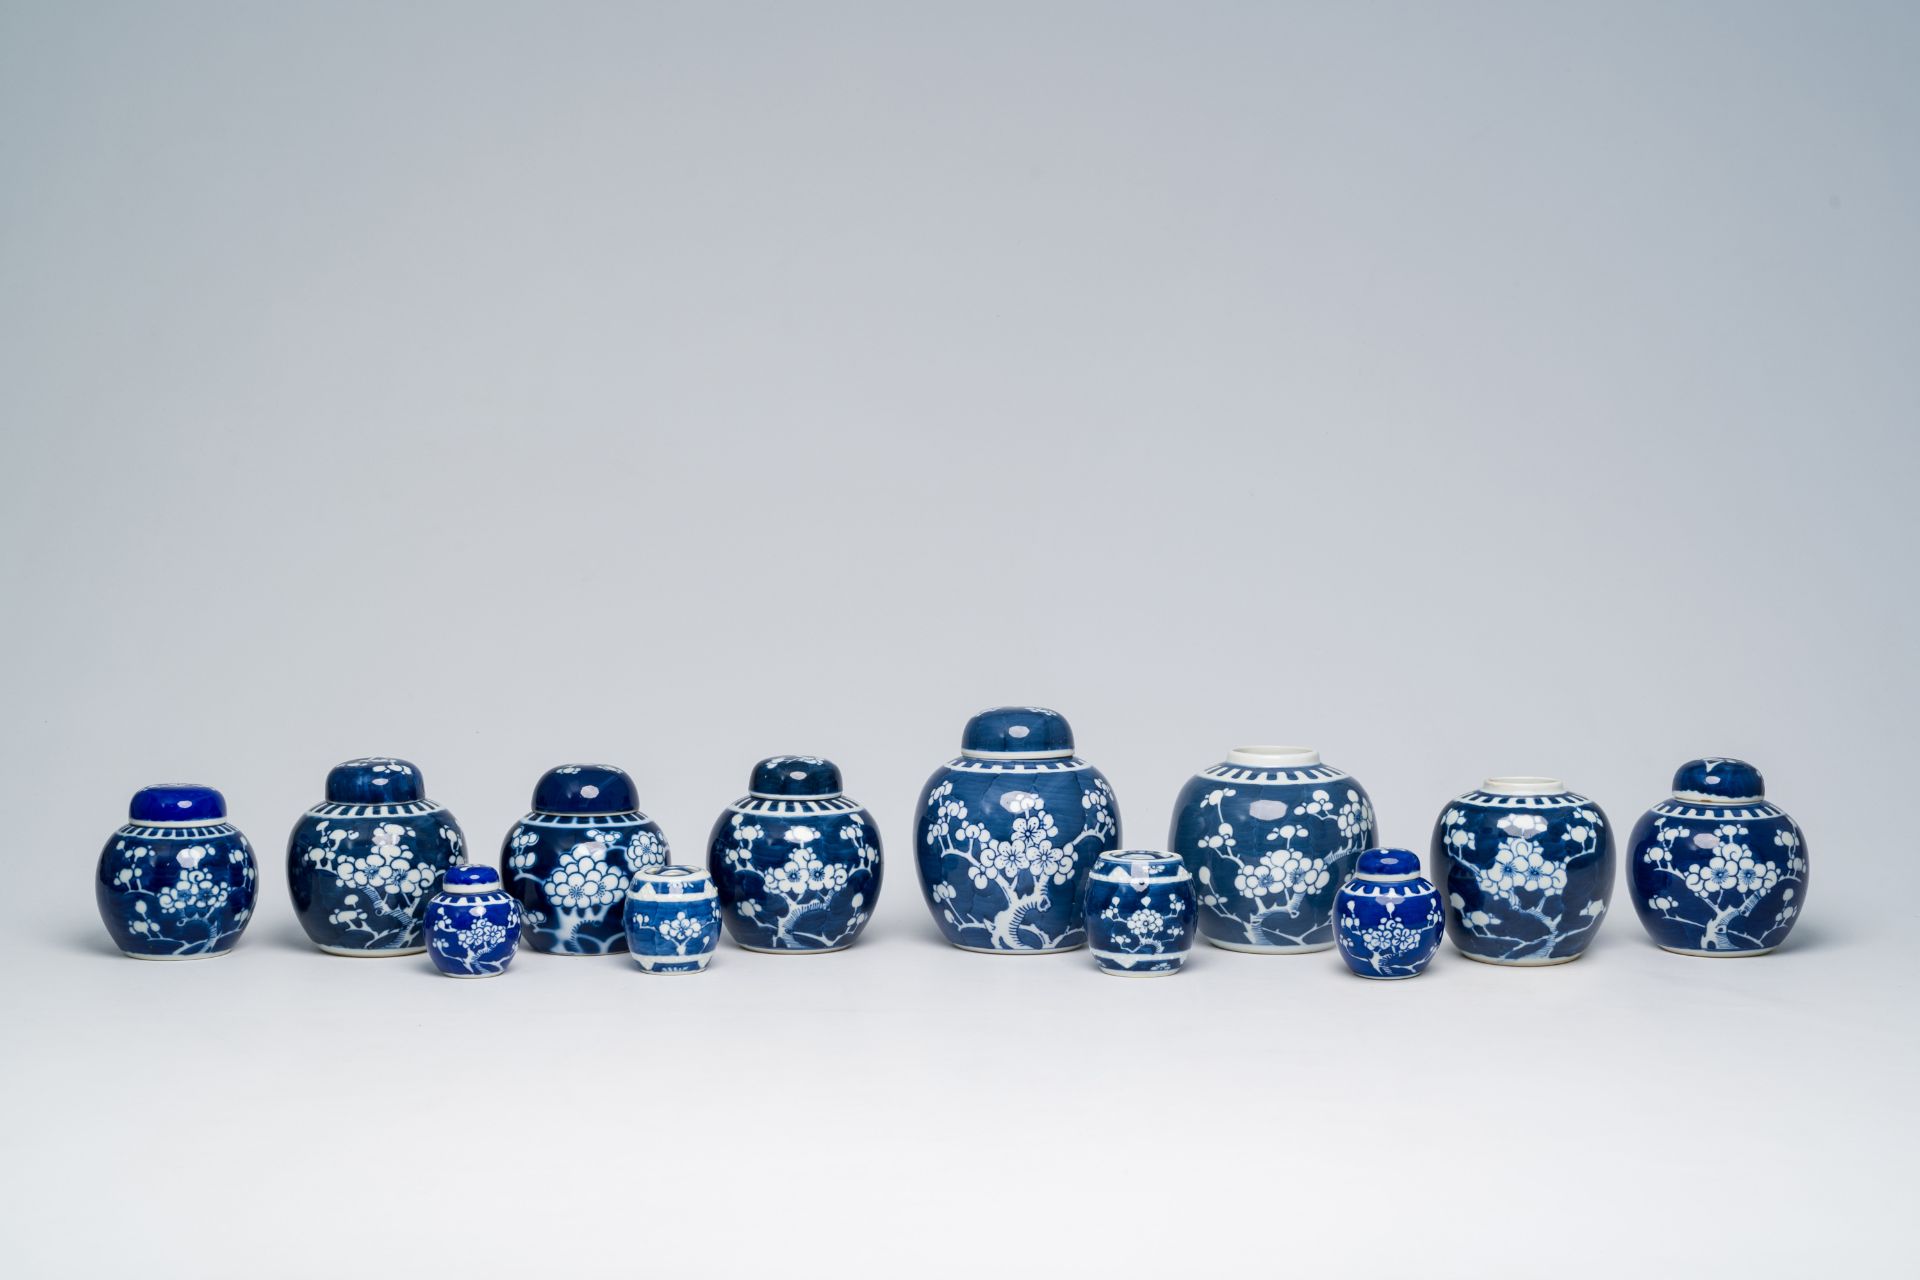 A varied collection of Chinese blue and white prunus on cracked ice ground porcelain, 19th/20th C. - Image 12 of 15